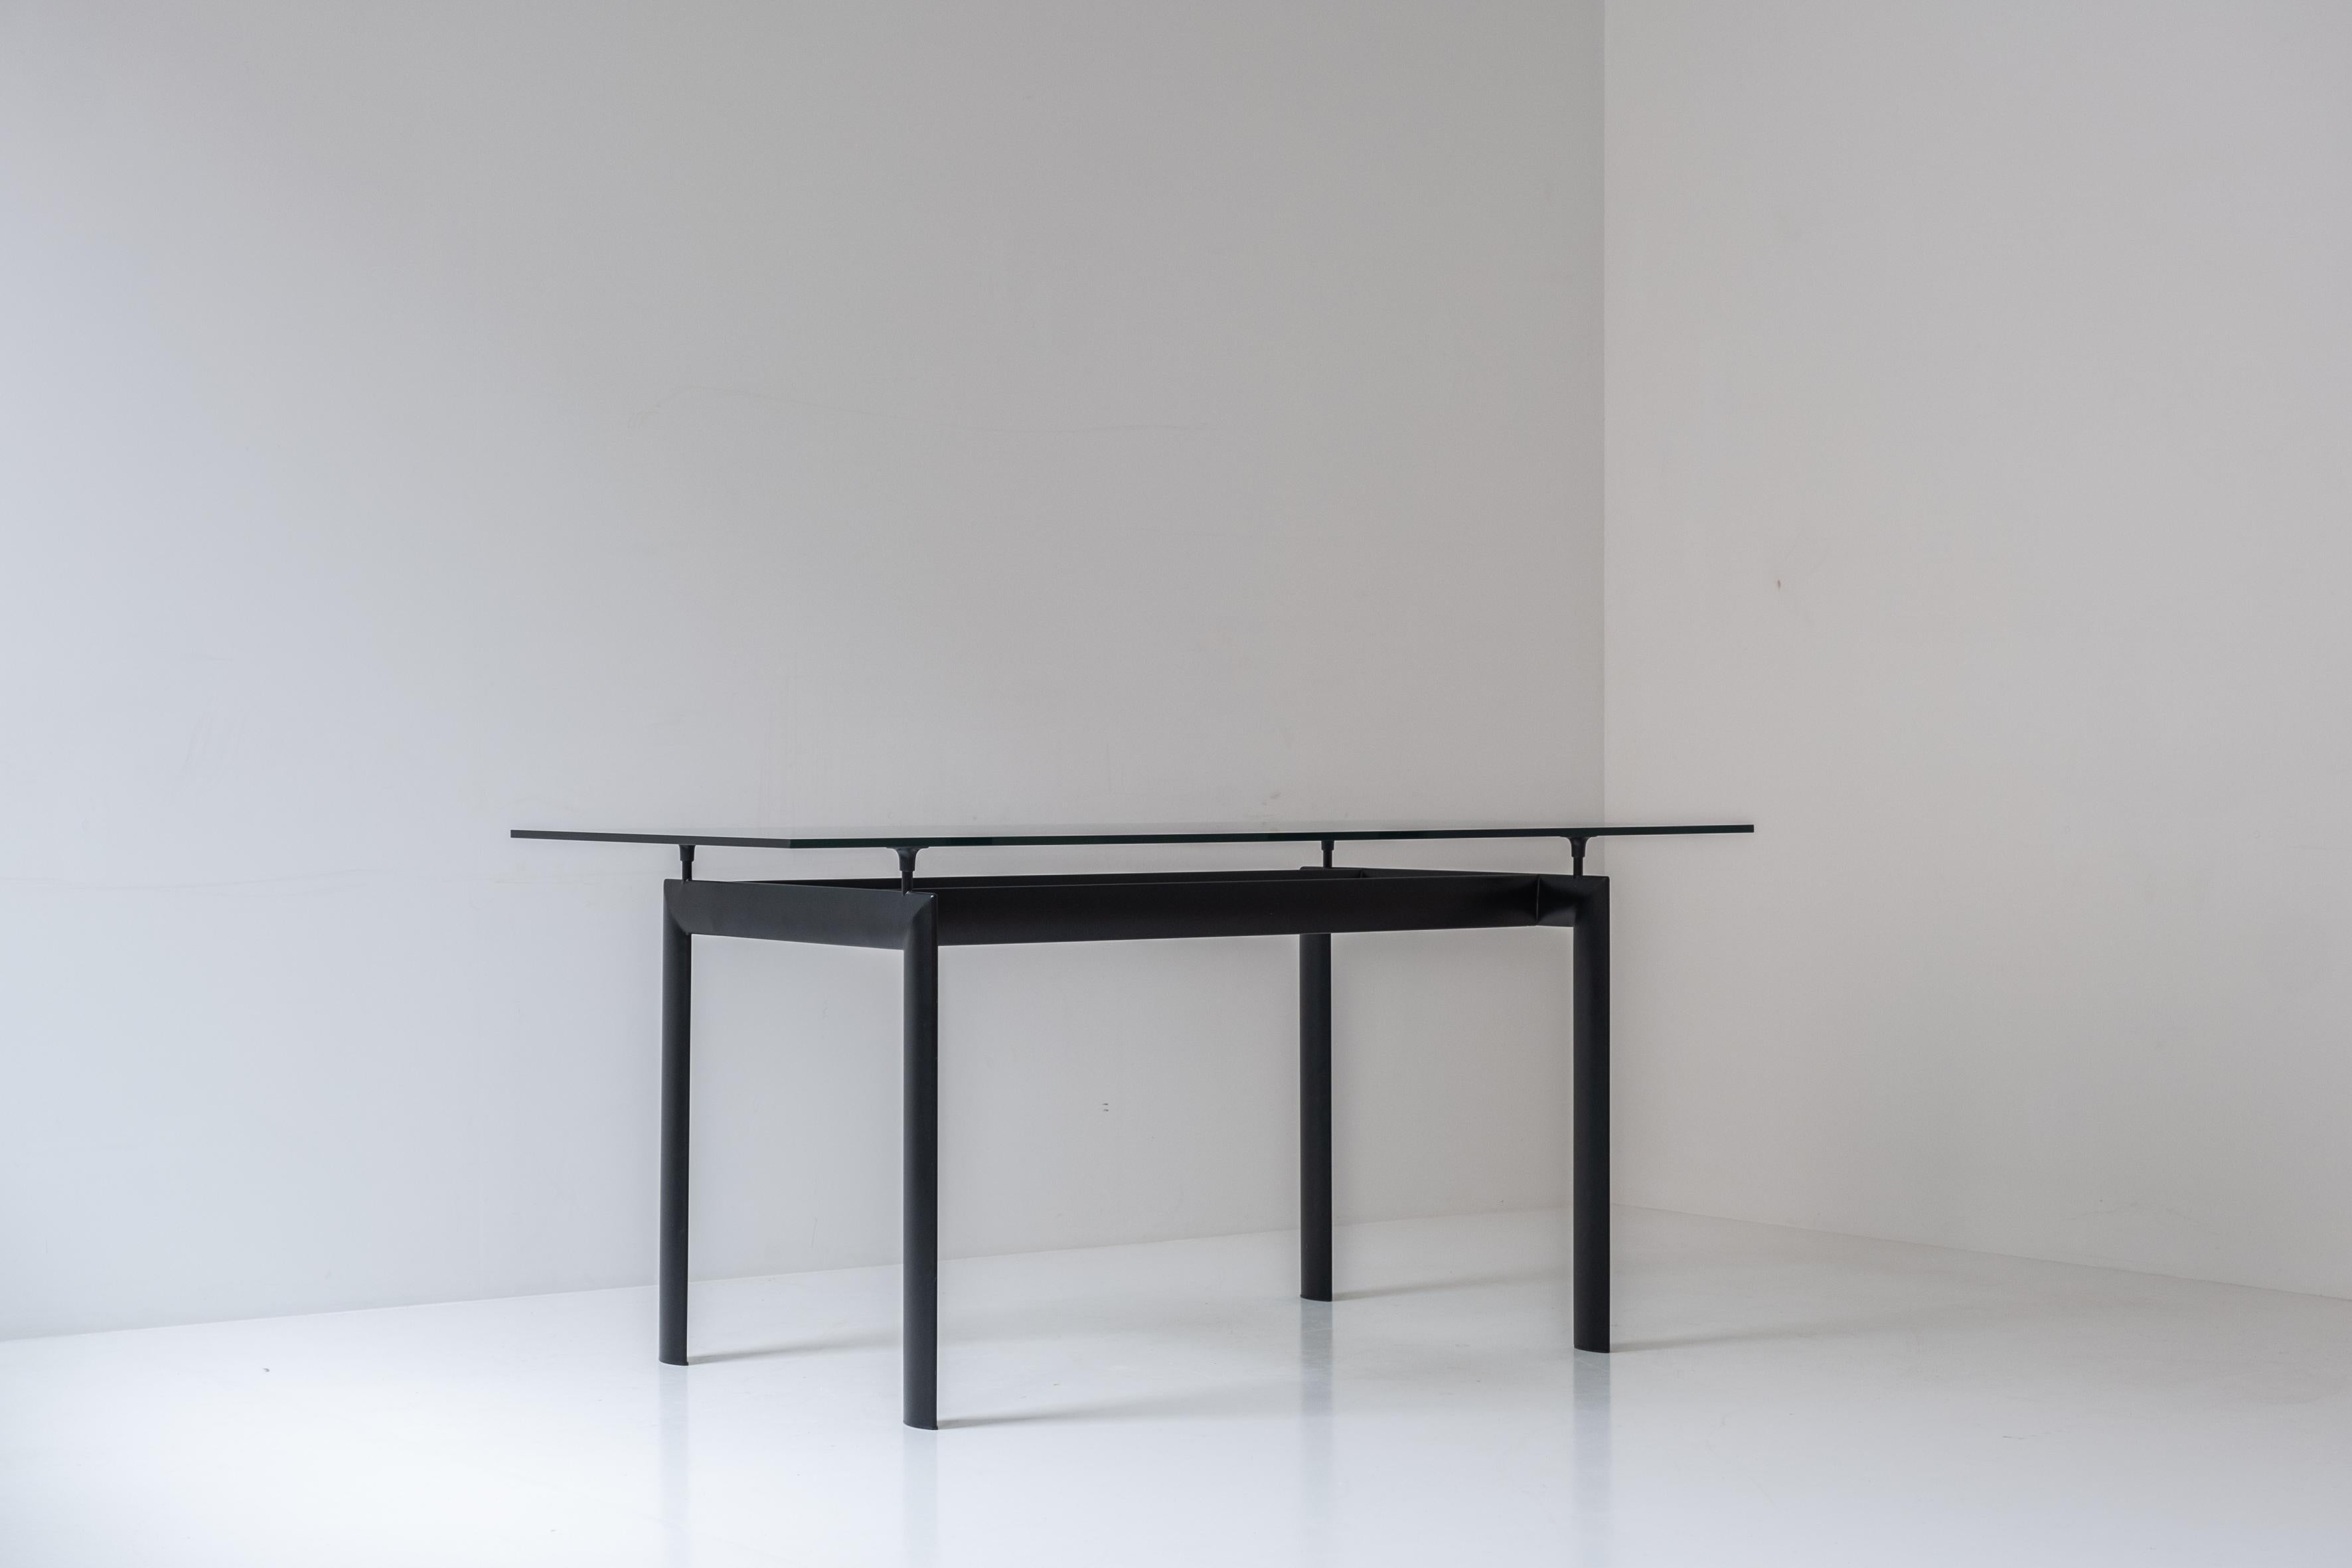 Rectangular glass dining table from the 1980s. This table features a black lacquered aluminium base and glass top. Presented in a very good condition. Clearly inspired by the LC6 by Le Corbusier.